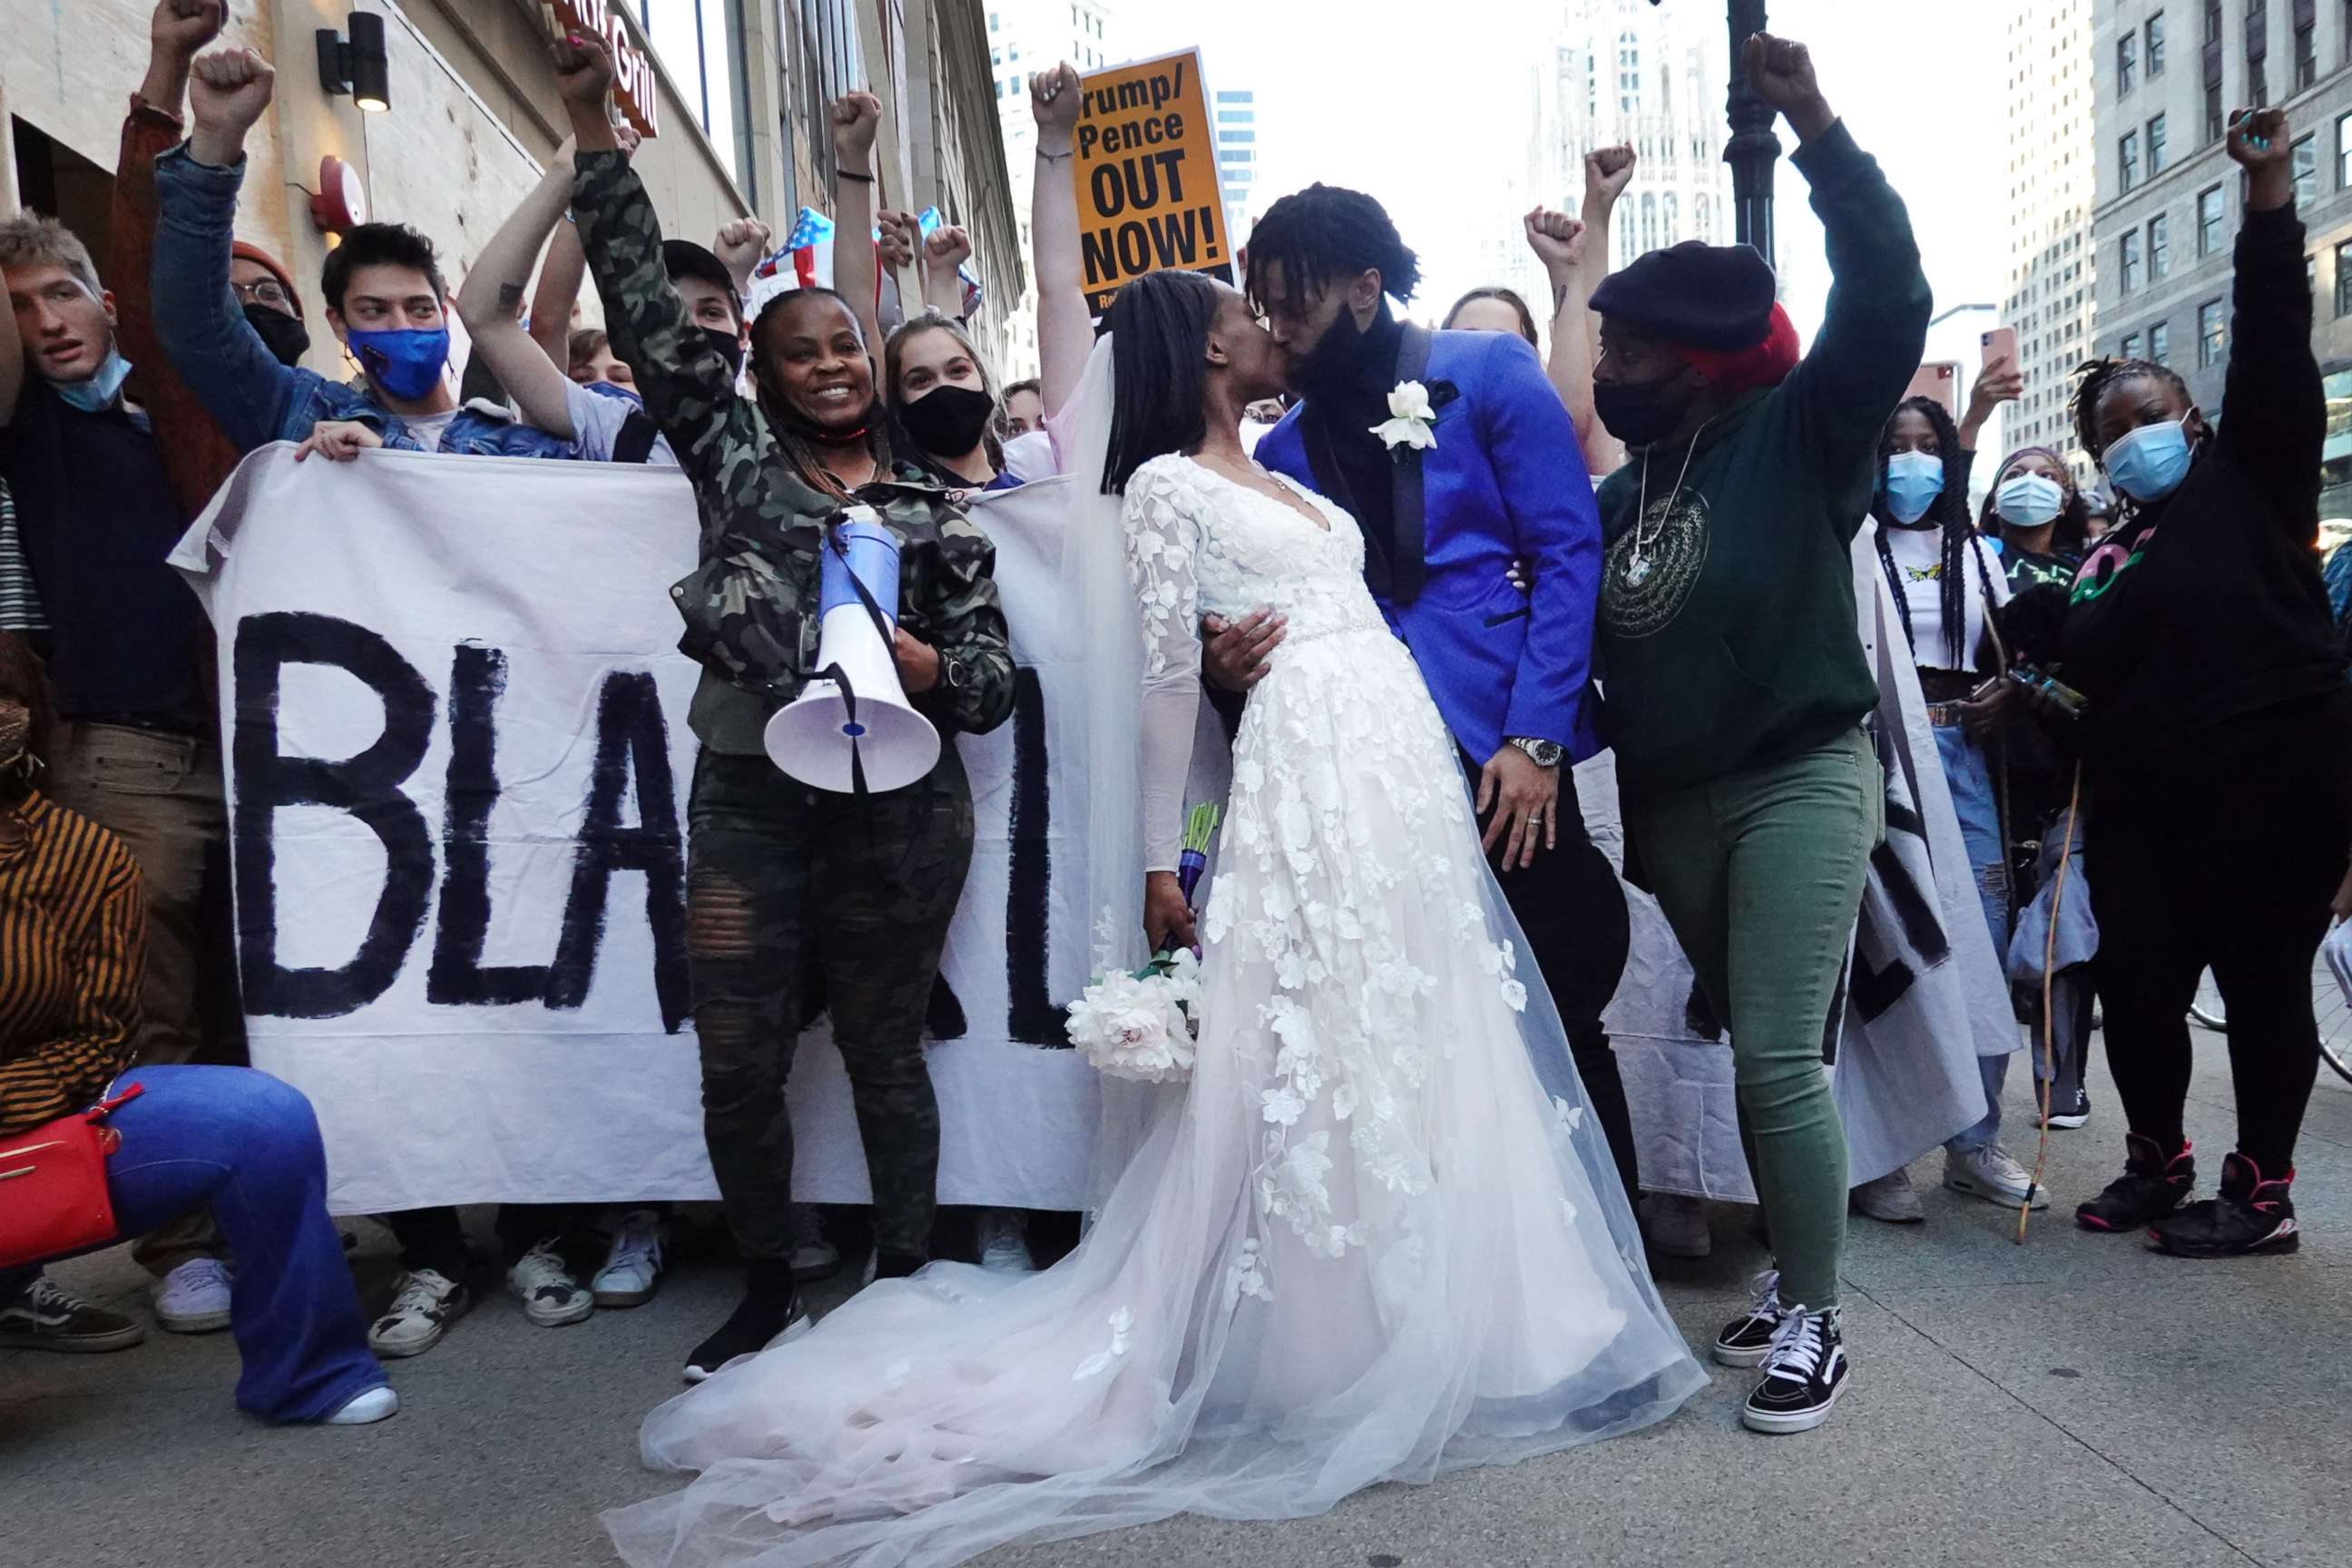 PHOTO: Julian and Fatimah Miller stop to grab a memory on their wedding day with a group of supporters of President-elect Joe Biden as they celebrate downtown on Nov. 07, 2020 in Chicago.